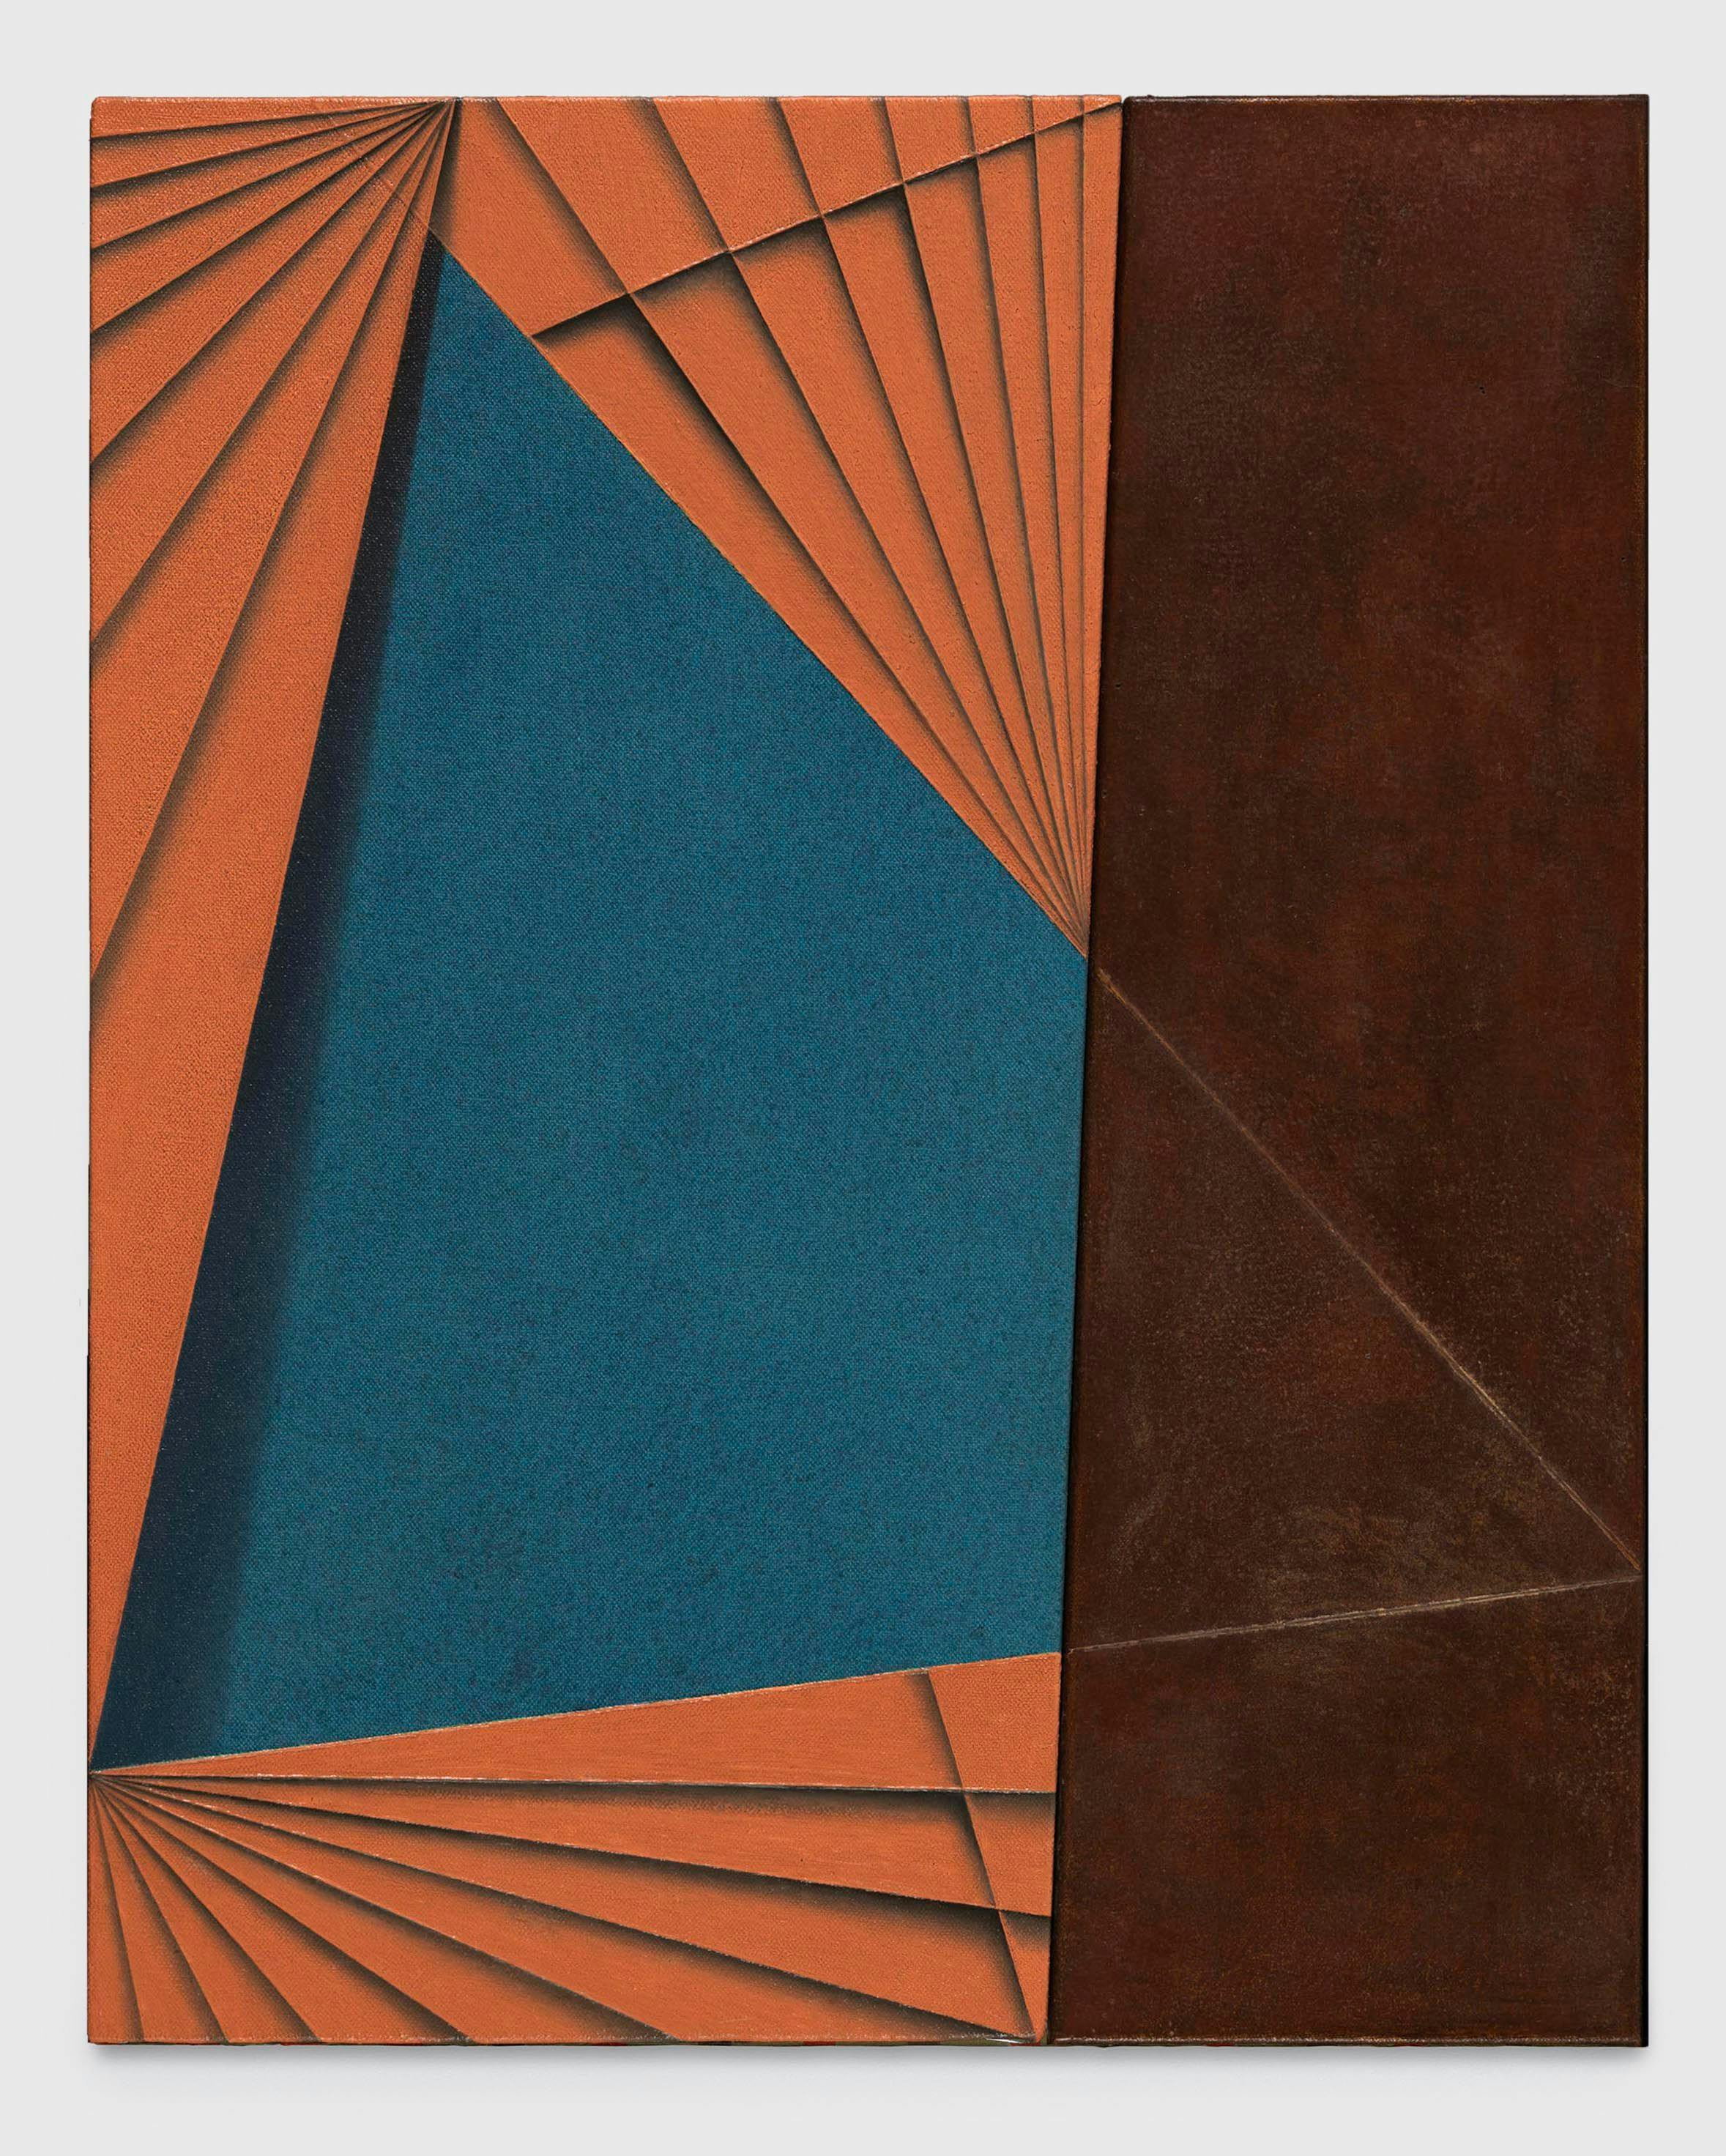 A painting by Tomma Abts, titled Theesko, dated 2019.